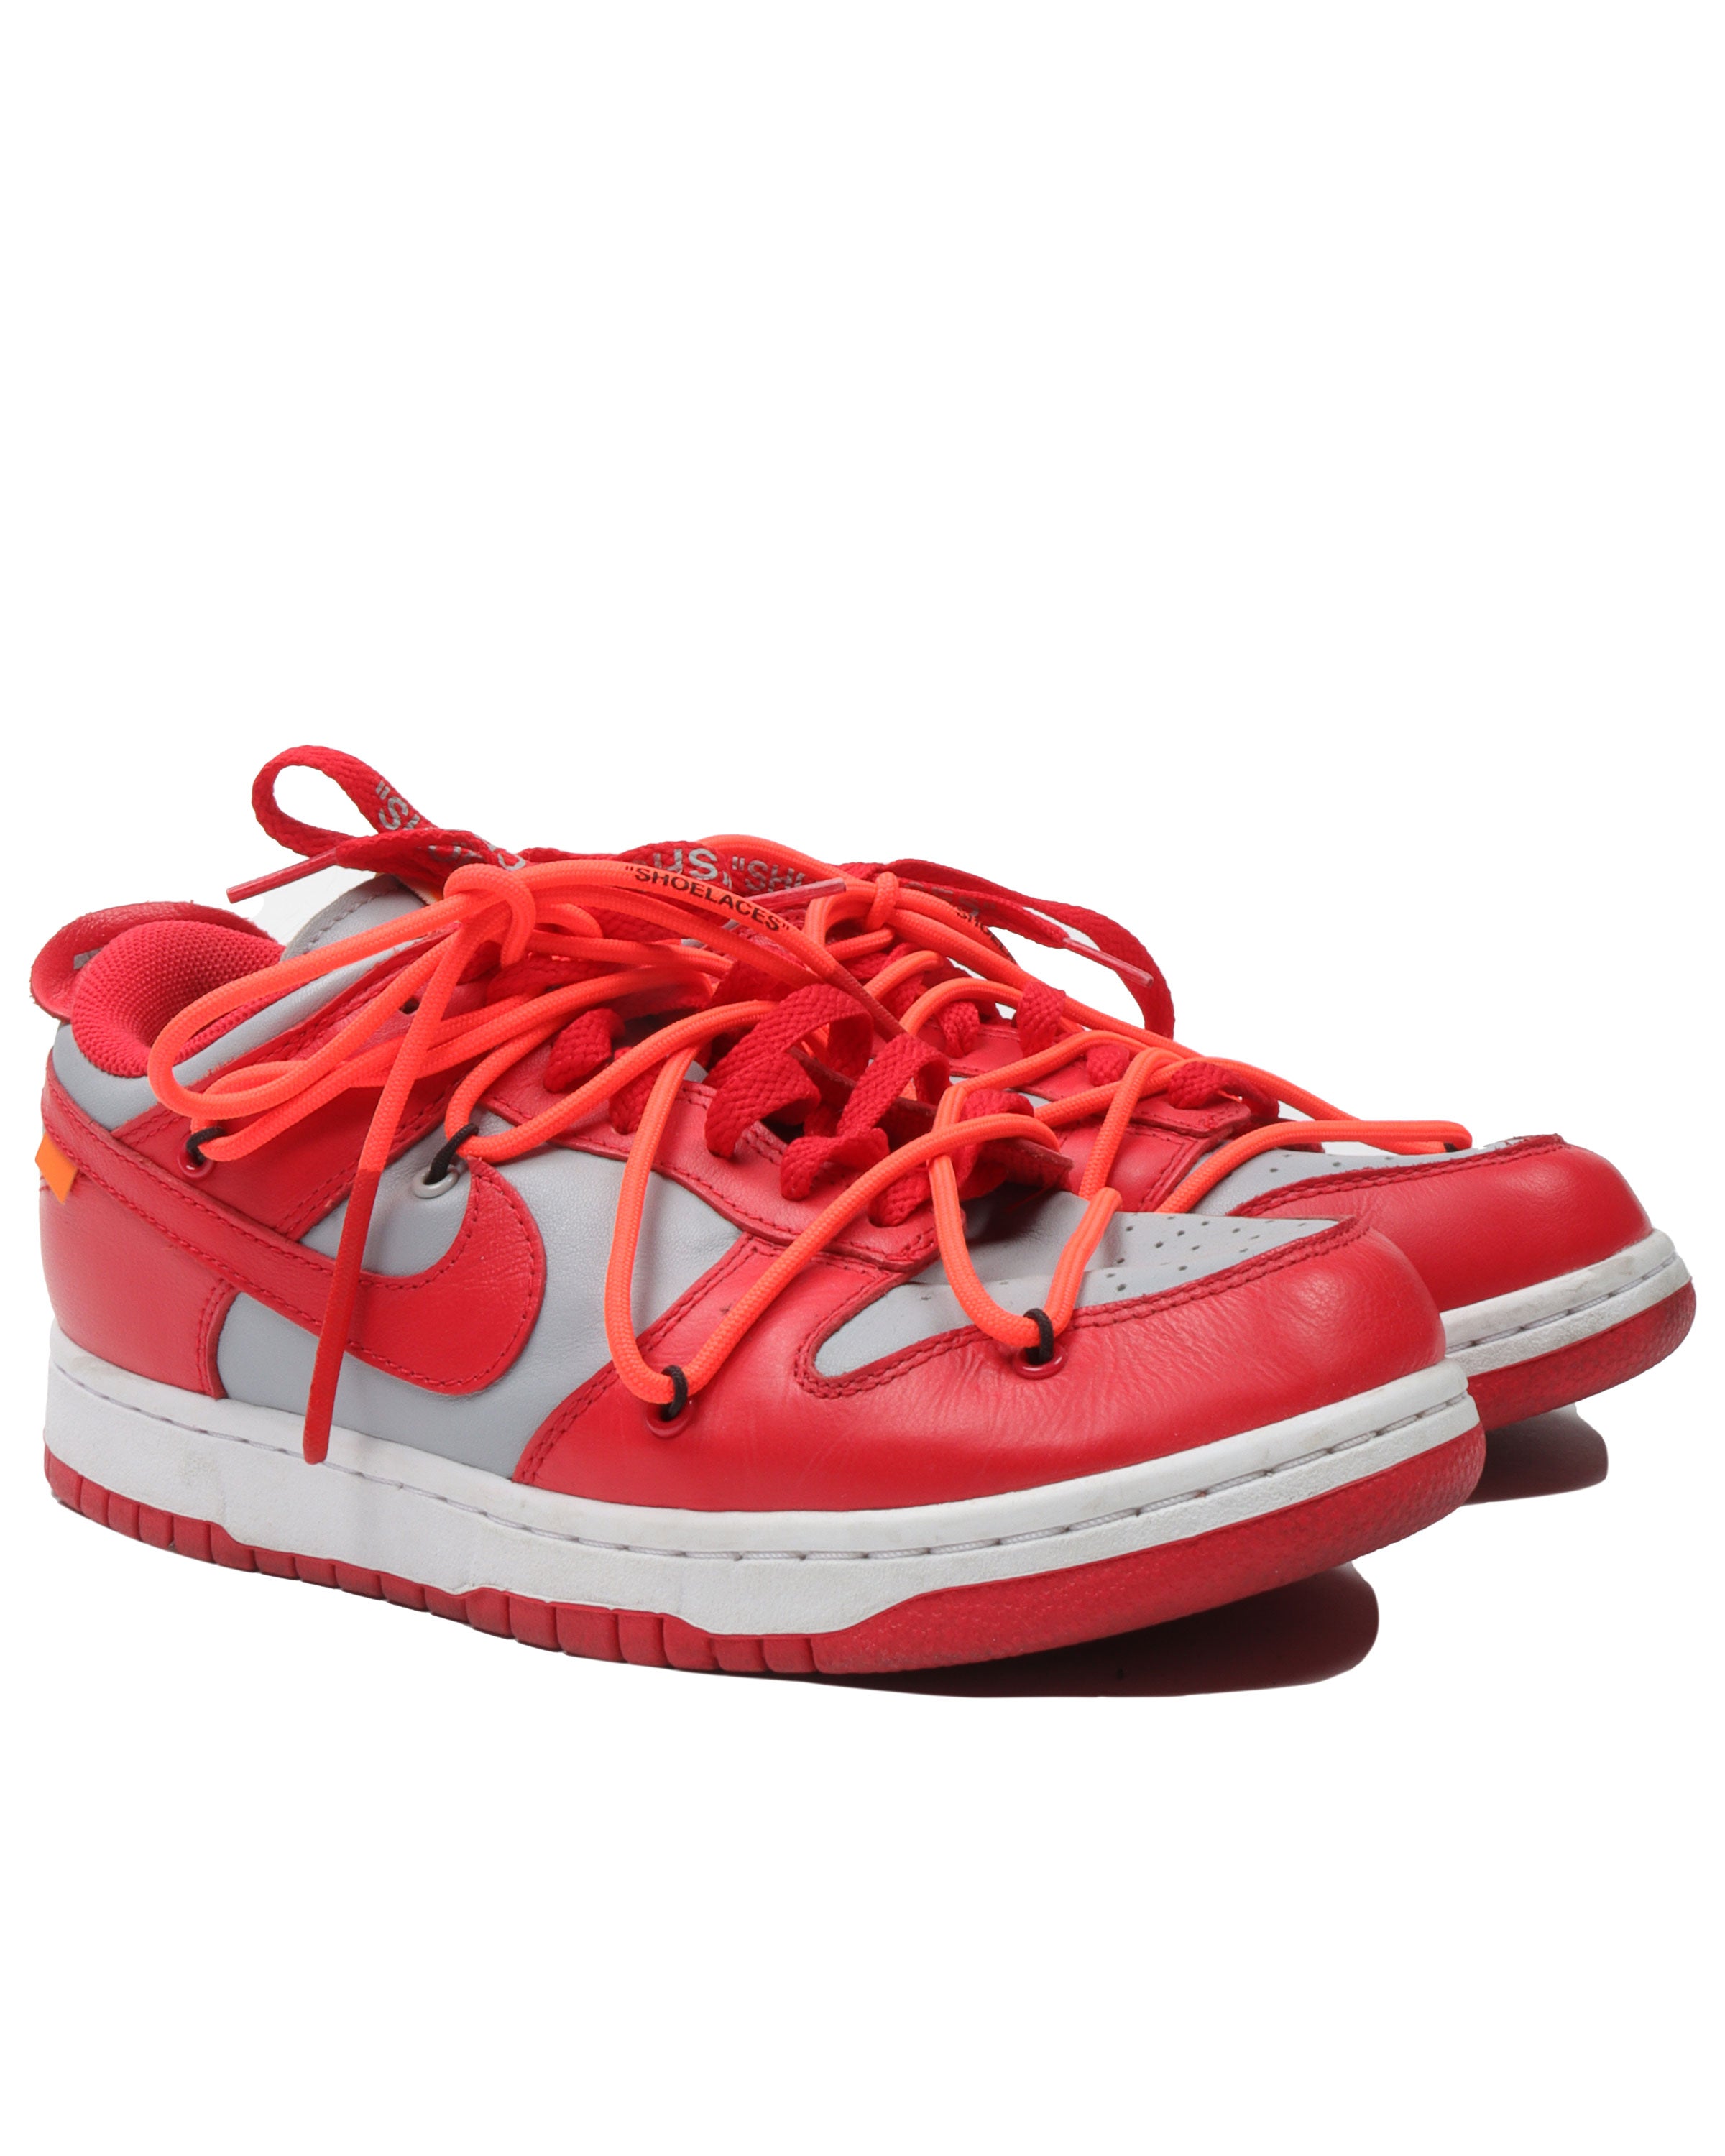 Off-White Dunk Low